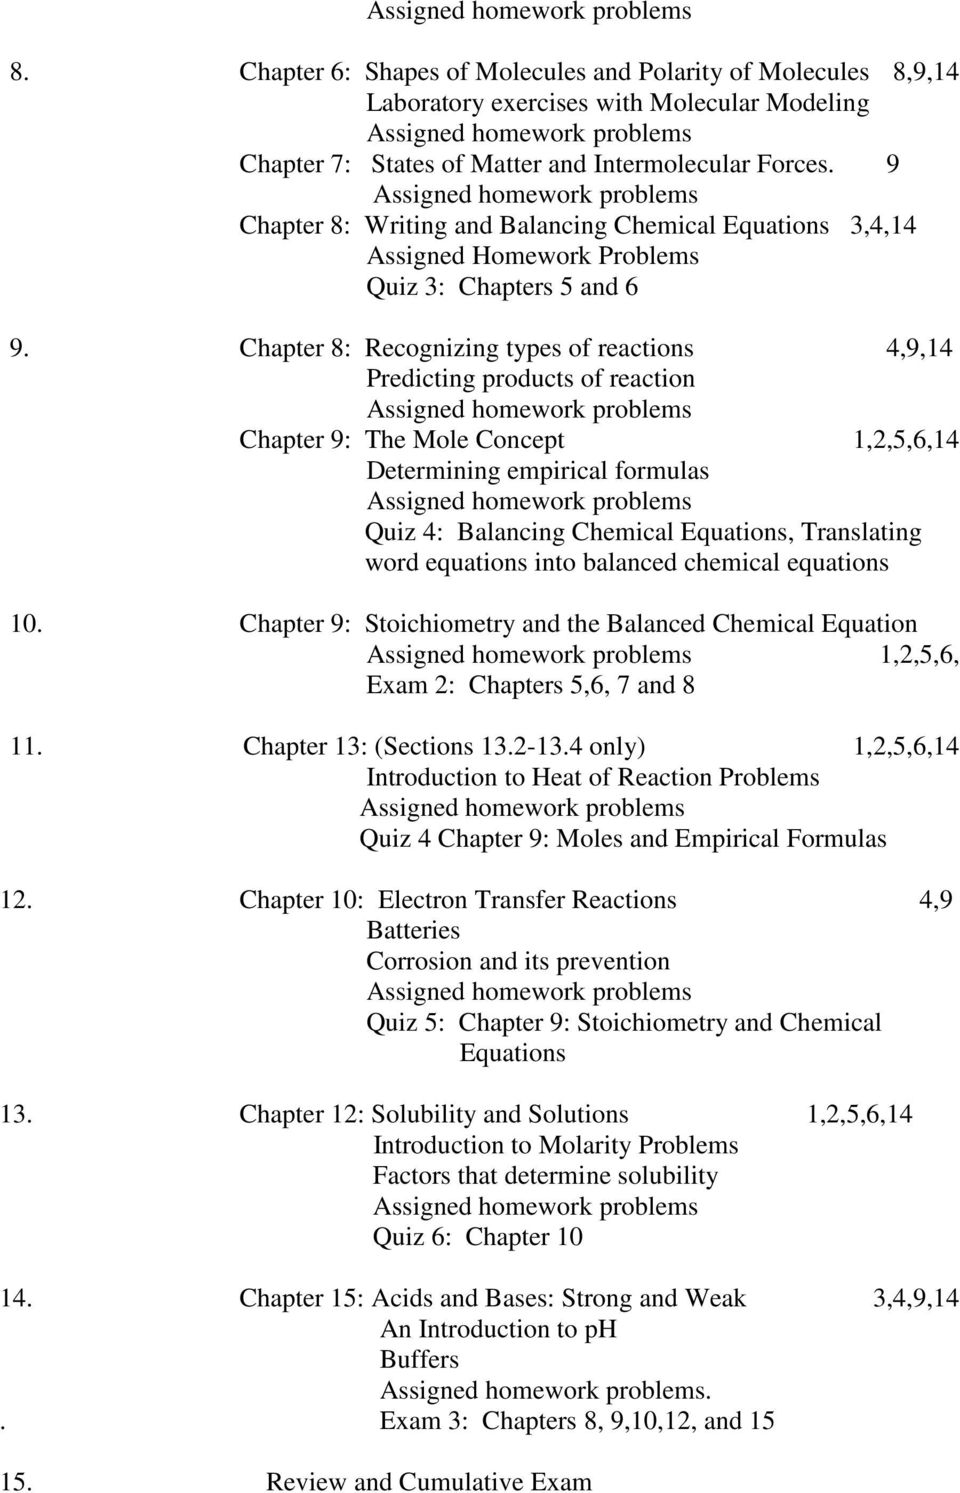 Chapter 8: Recognizing types of reactions 4,9,14 Predicting products of reaction Chapter 9: The Mole Concept 1,2,5,6,14 Determining empirical formulas Quiz 4: Balancing Chemical Equations,